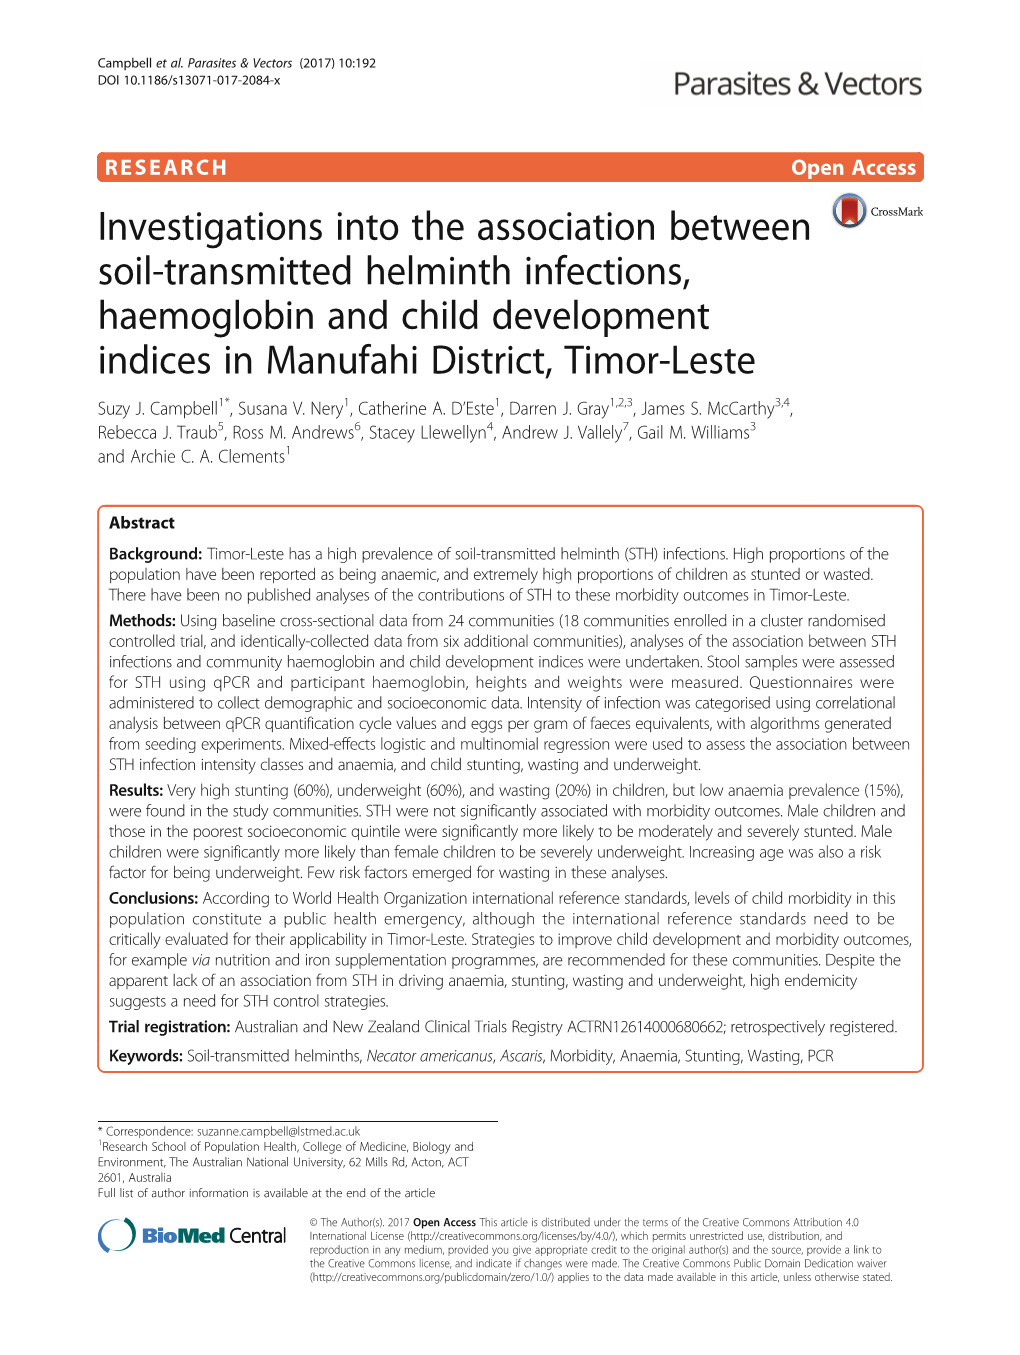 Investigations Into the Association Between Soil-Transmitted Helminth Infections, Haemoglobin and Child Development Indices in Manufahi District, Timor-Leste Suzy J